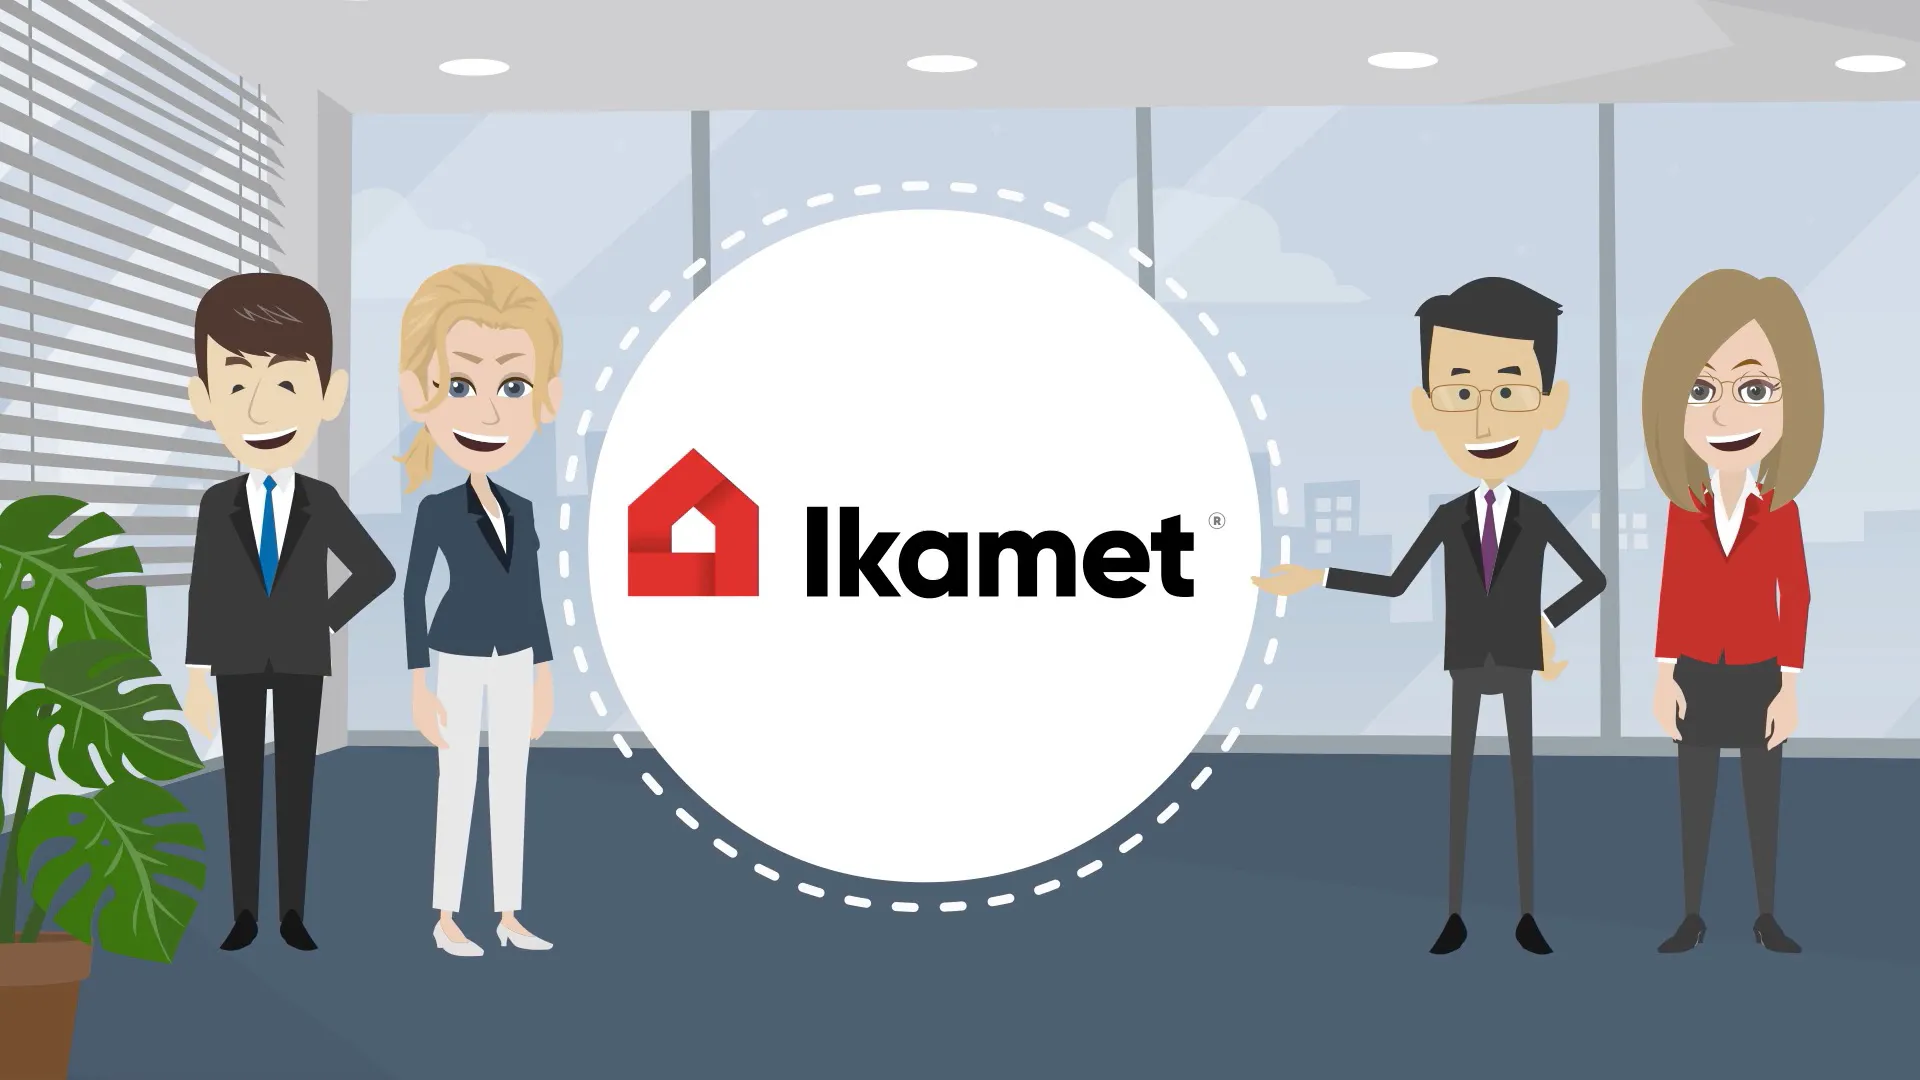 Ikamet.com Members Save Up to 60% on Foreign Health Insurance